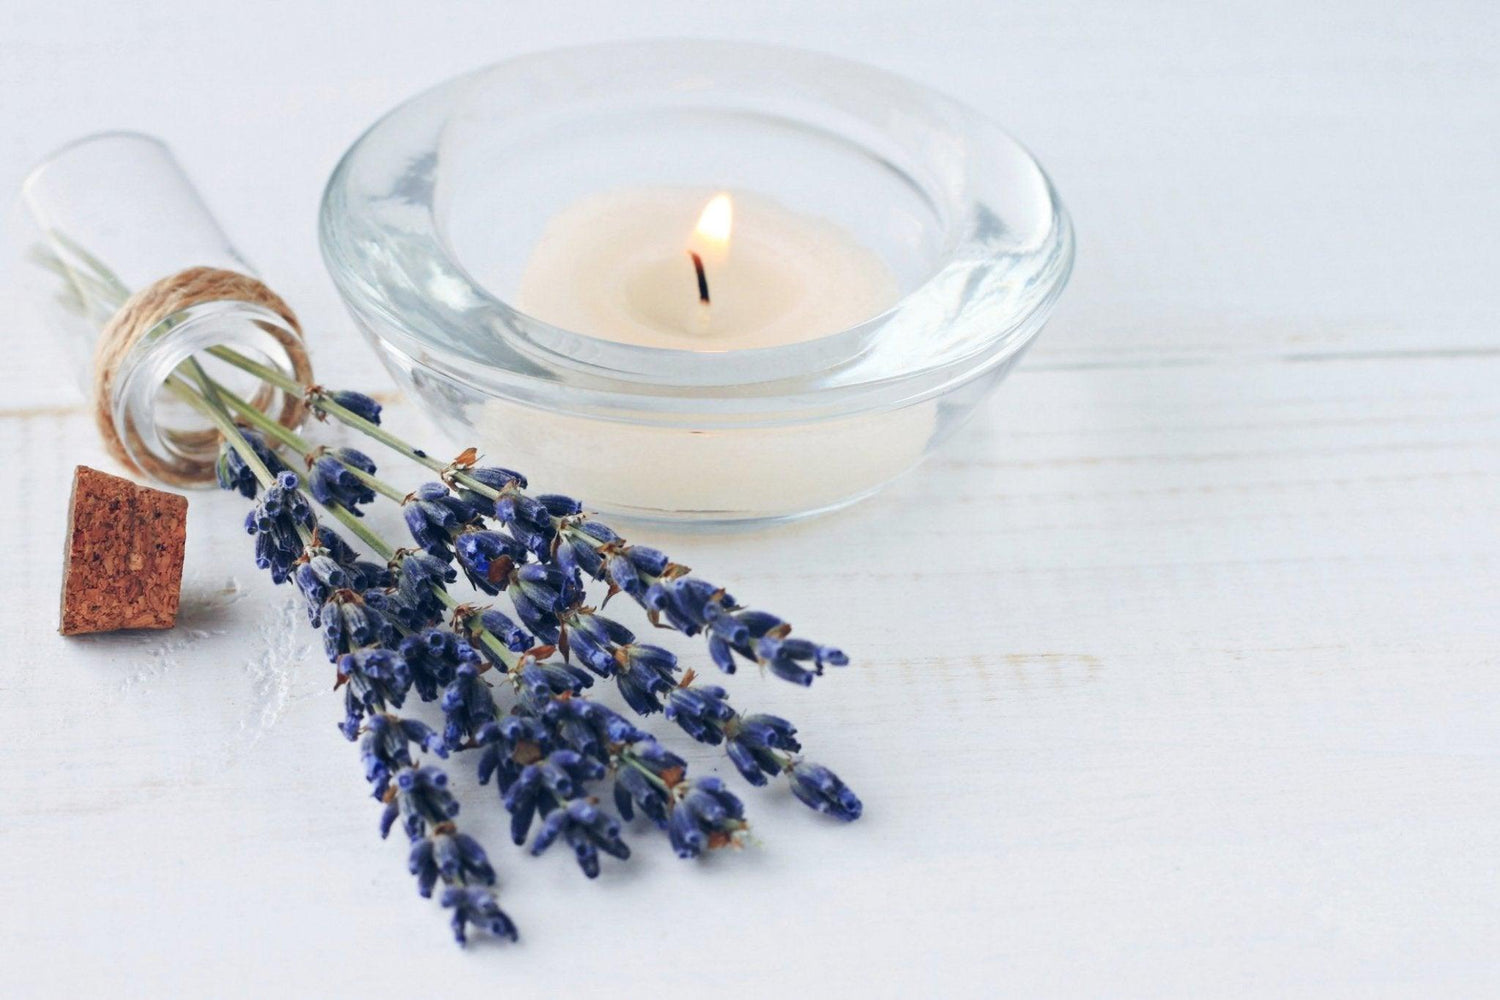 Subscribe and Save on your Favorite Lavender Products - Lavender Life Company